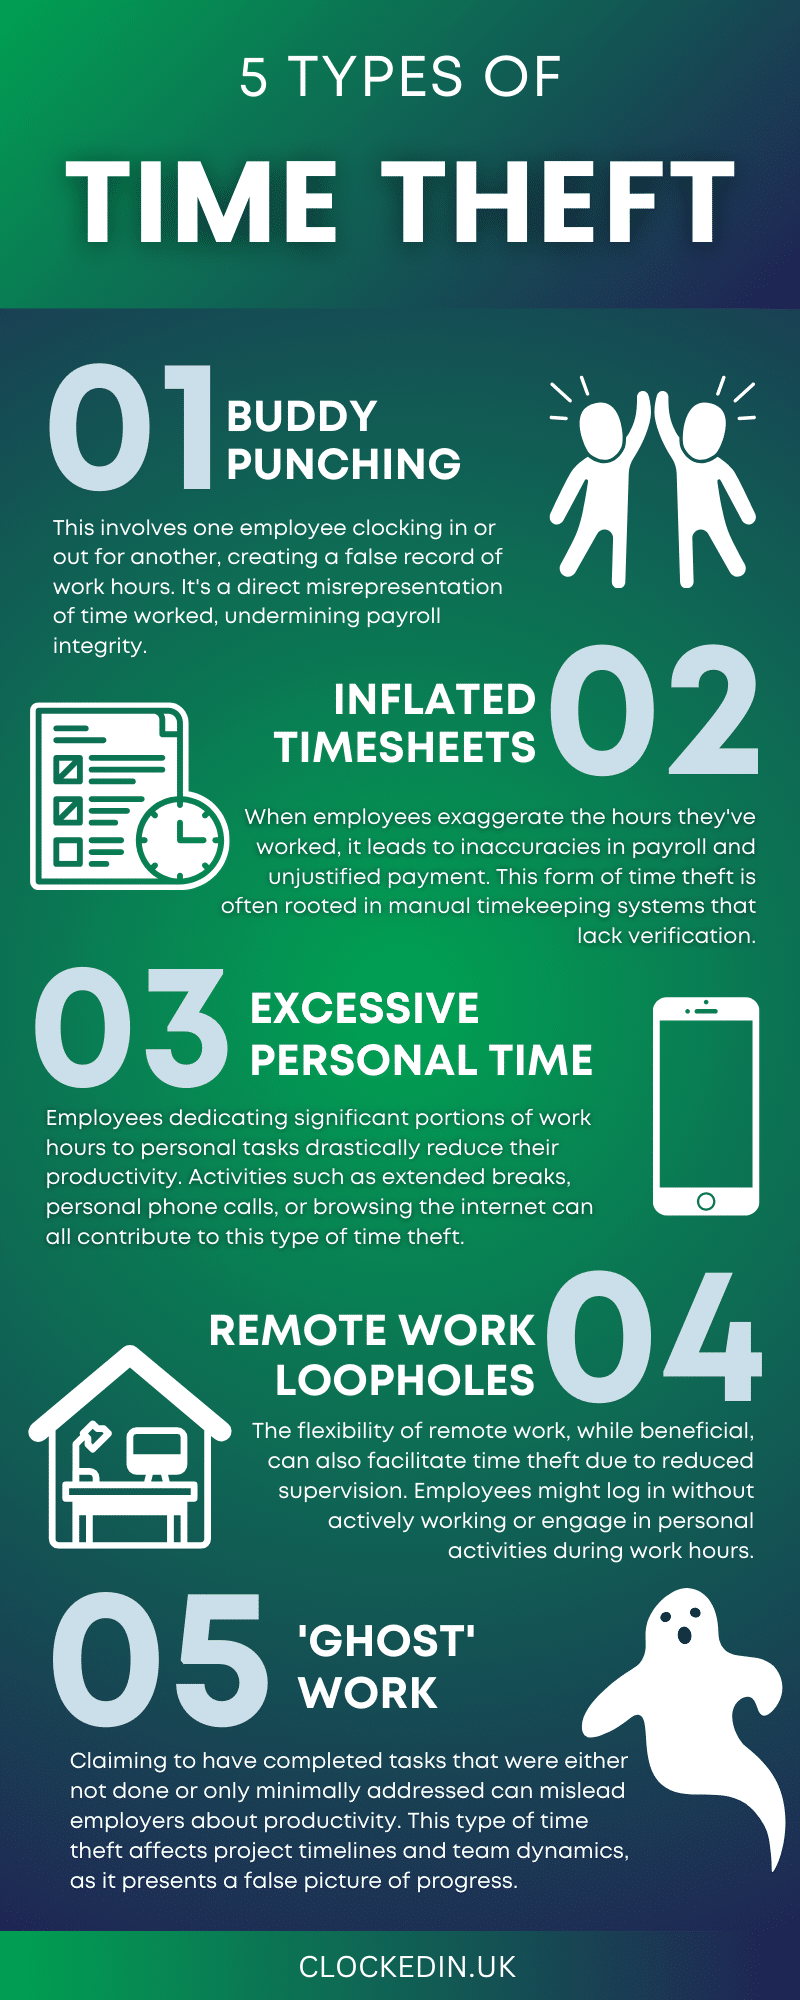 5 Types of Time Theft